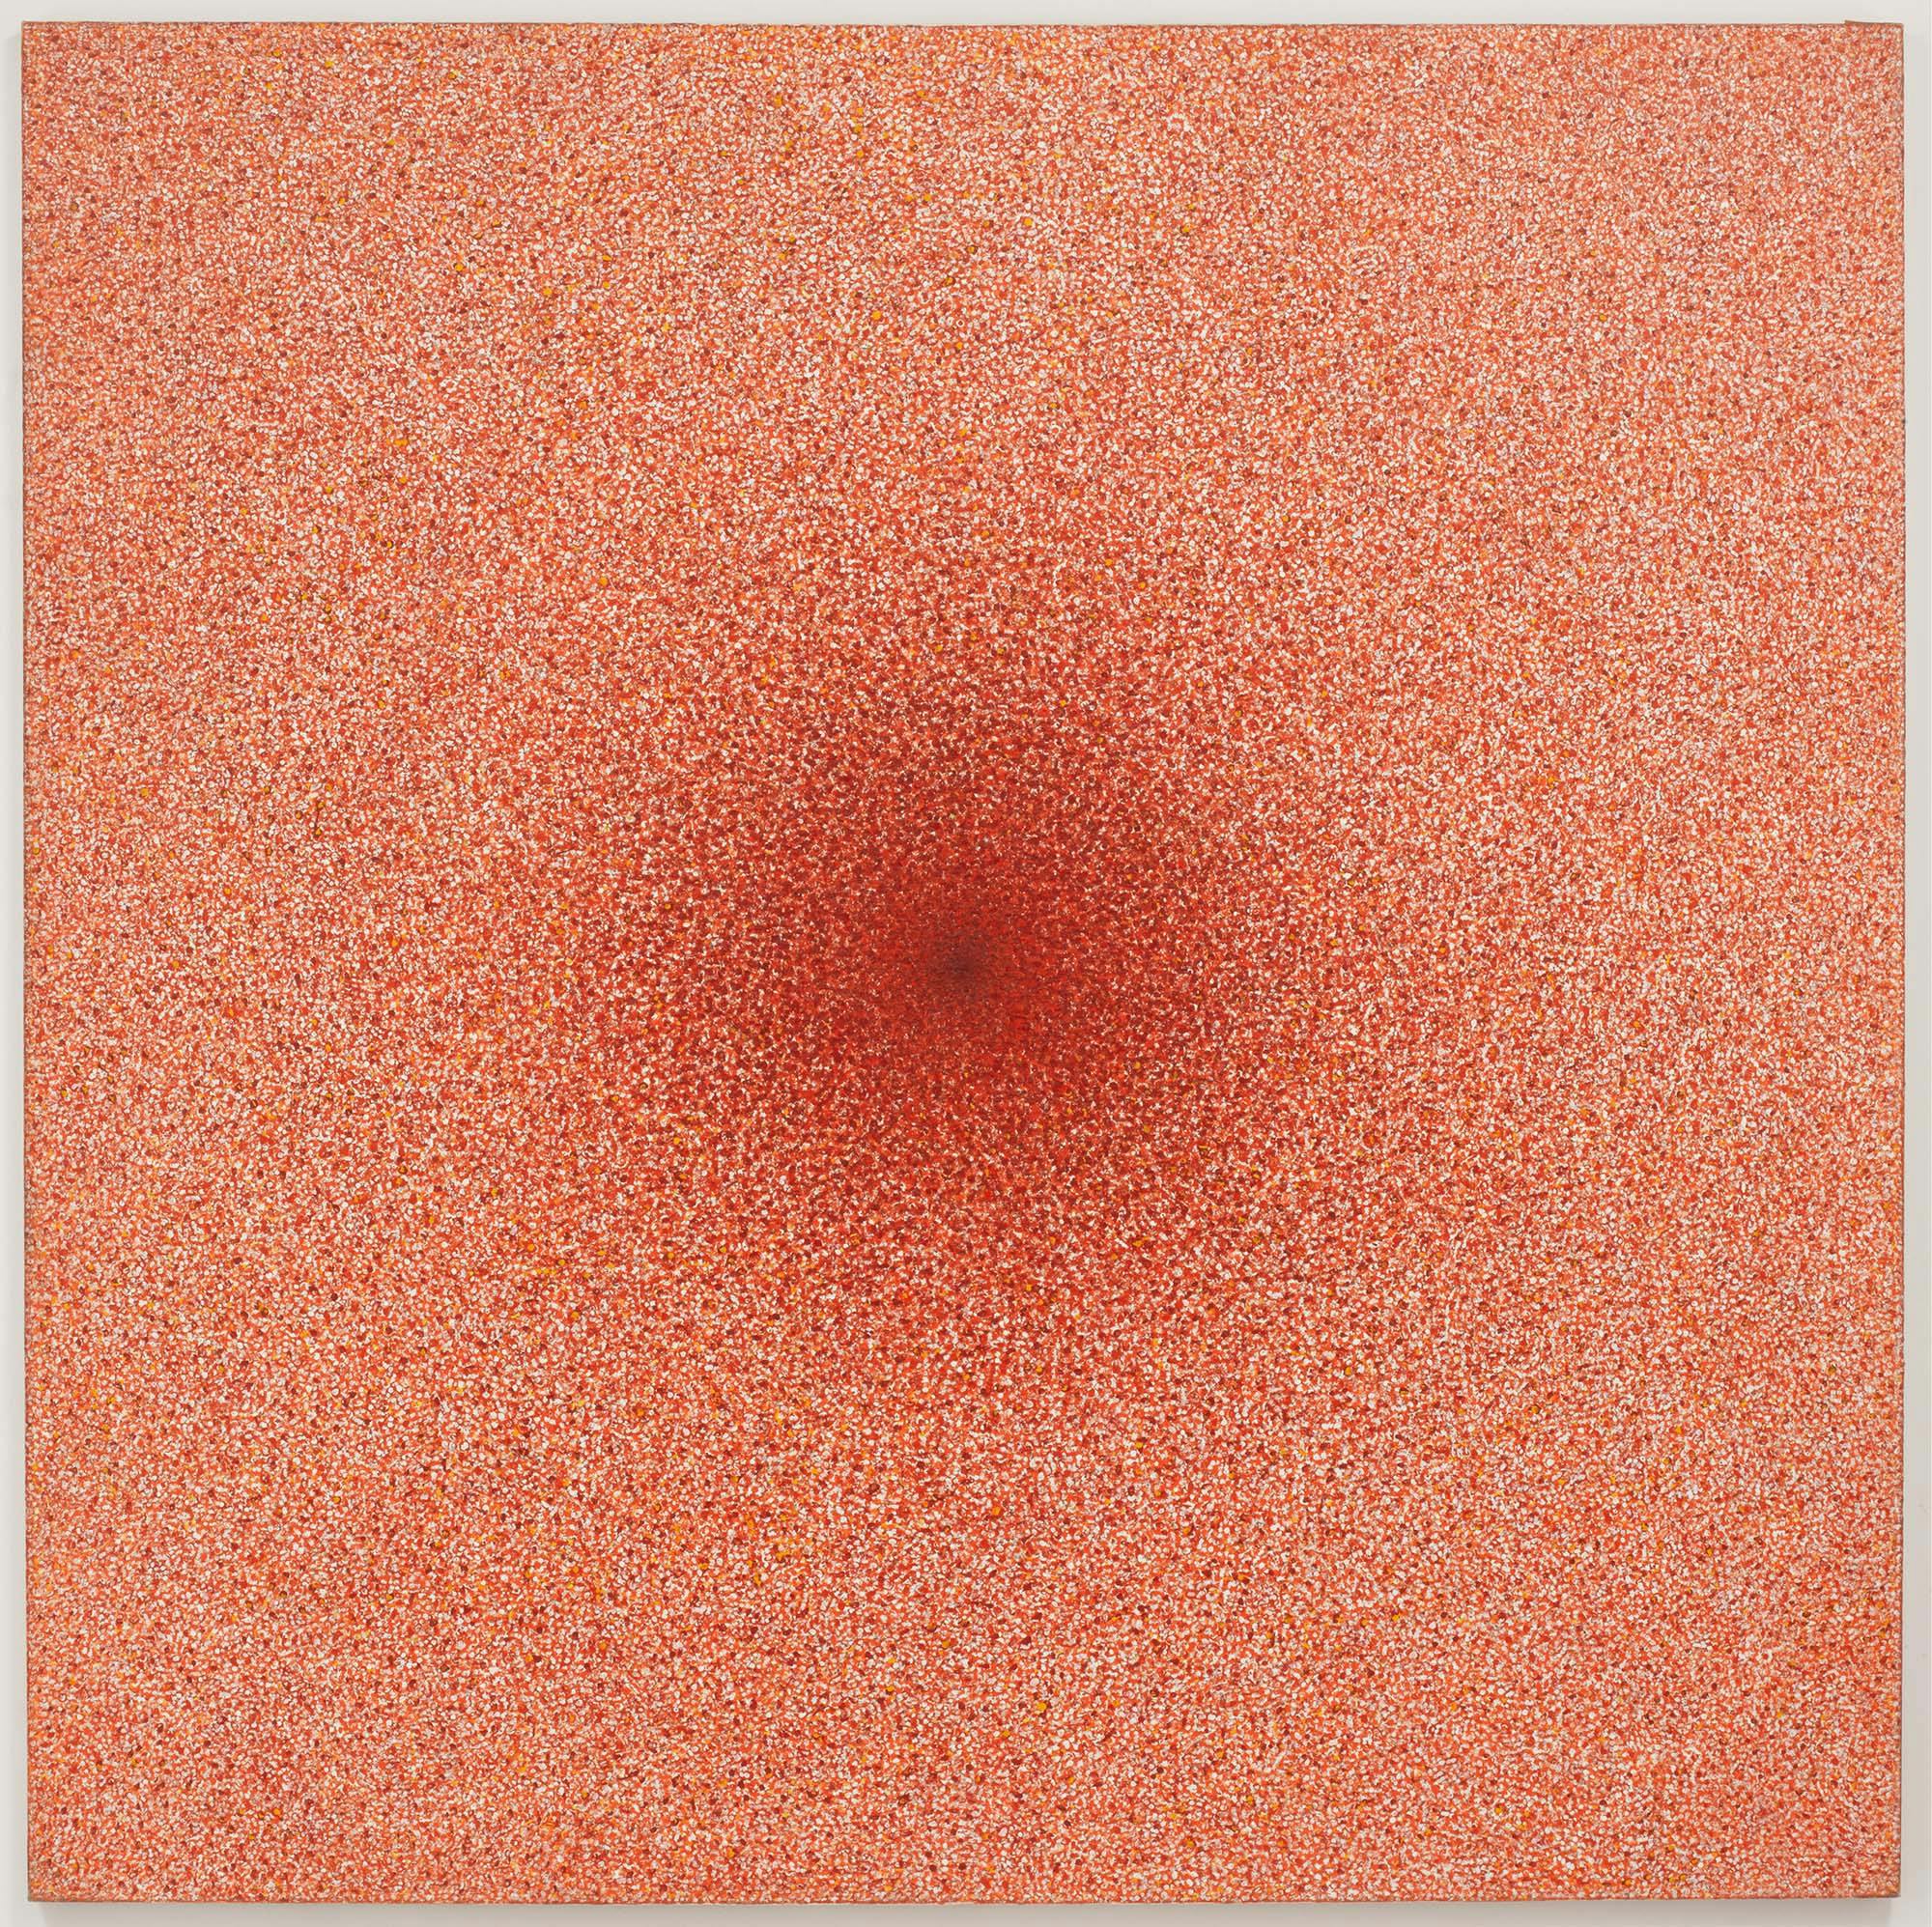 Radiance Number 8
1973–74
Acrylic on linen
90 x 90 in. (228.6 x 228.6 cm)
 – The Richard Pousette-Dart Foundation